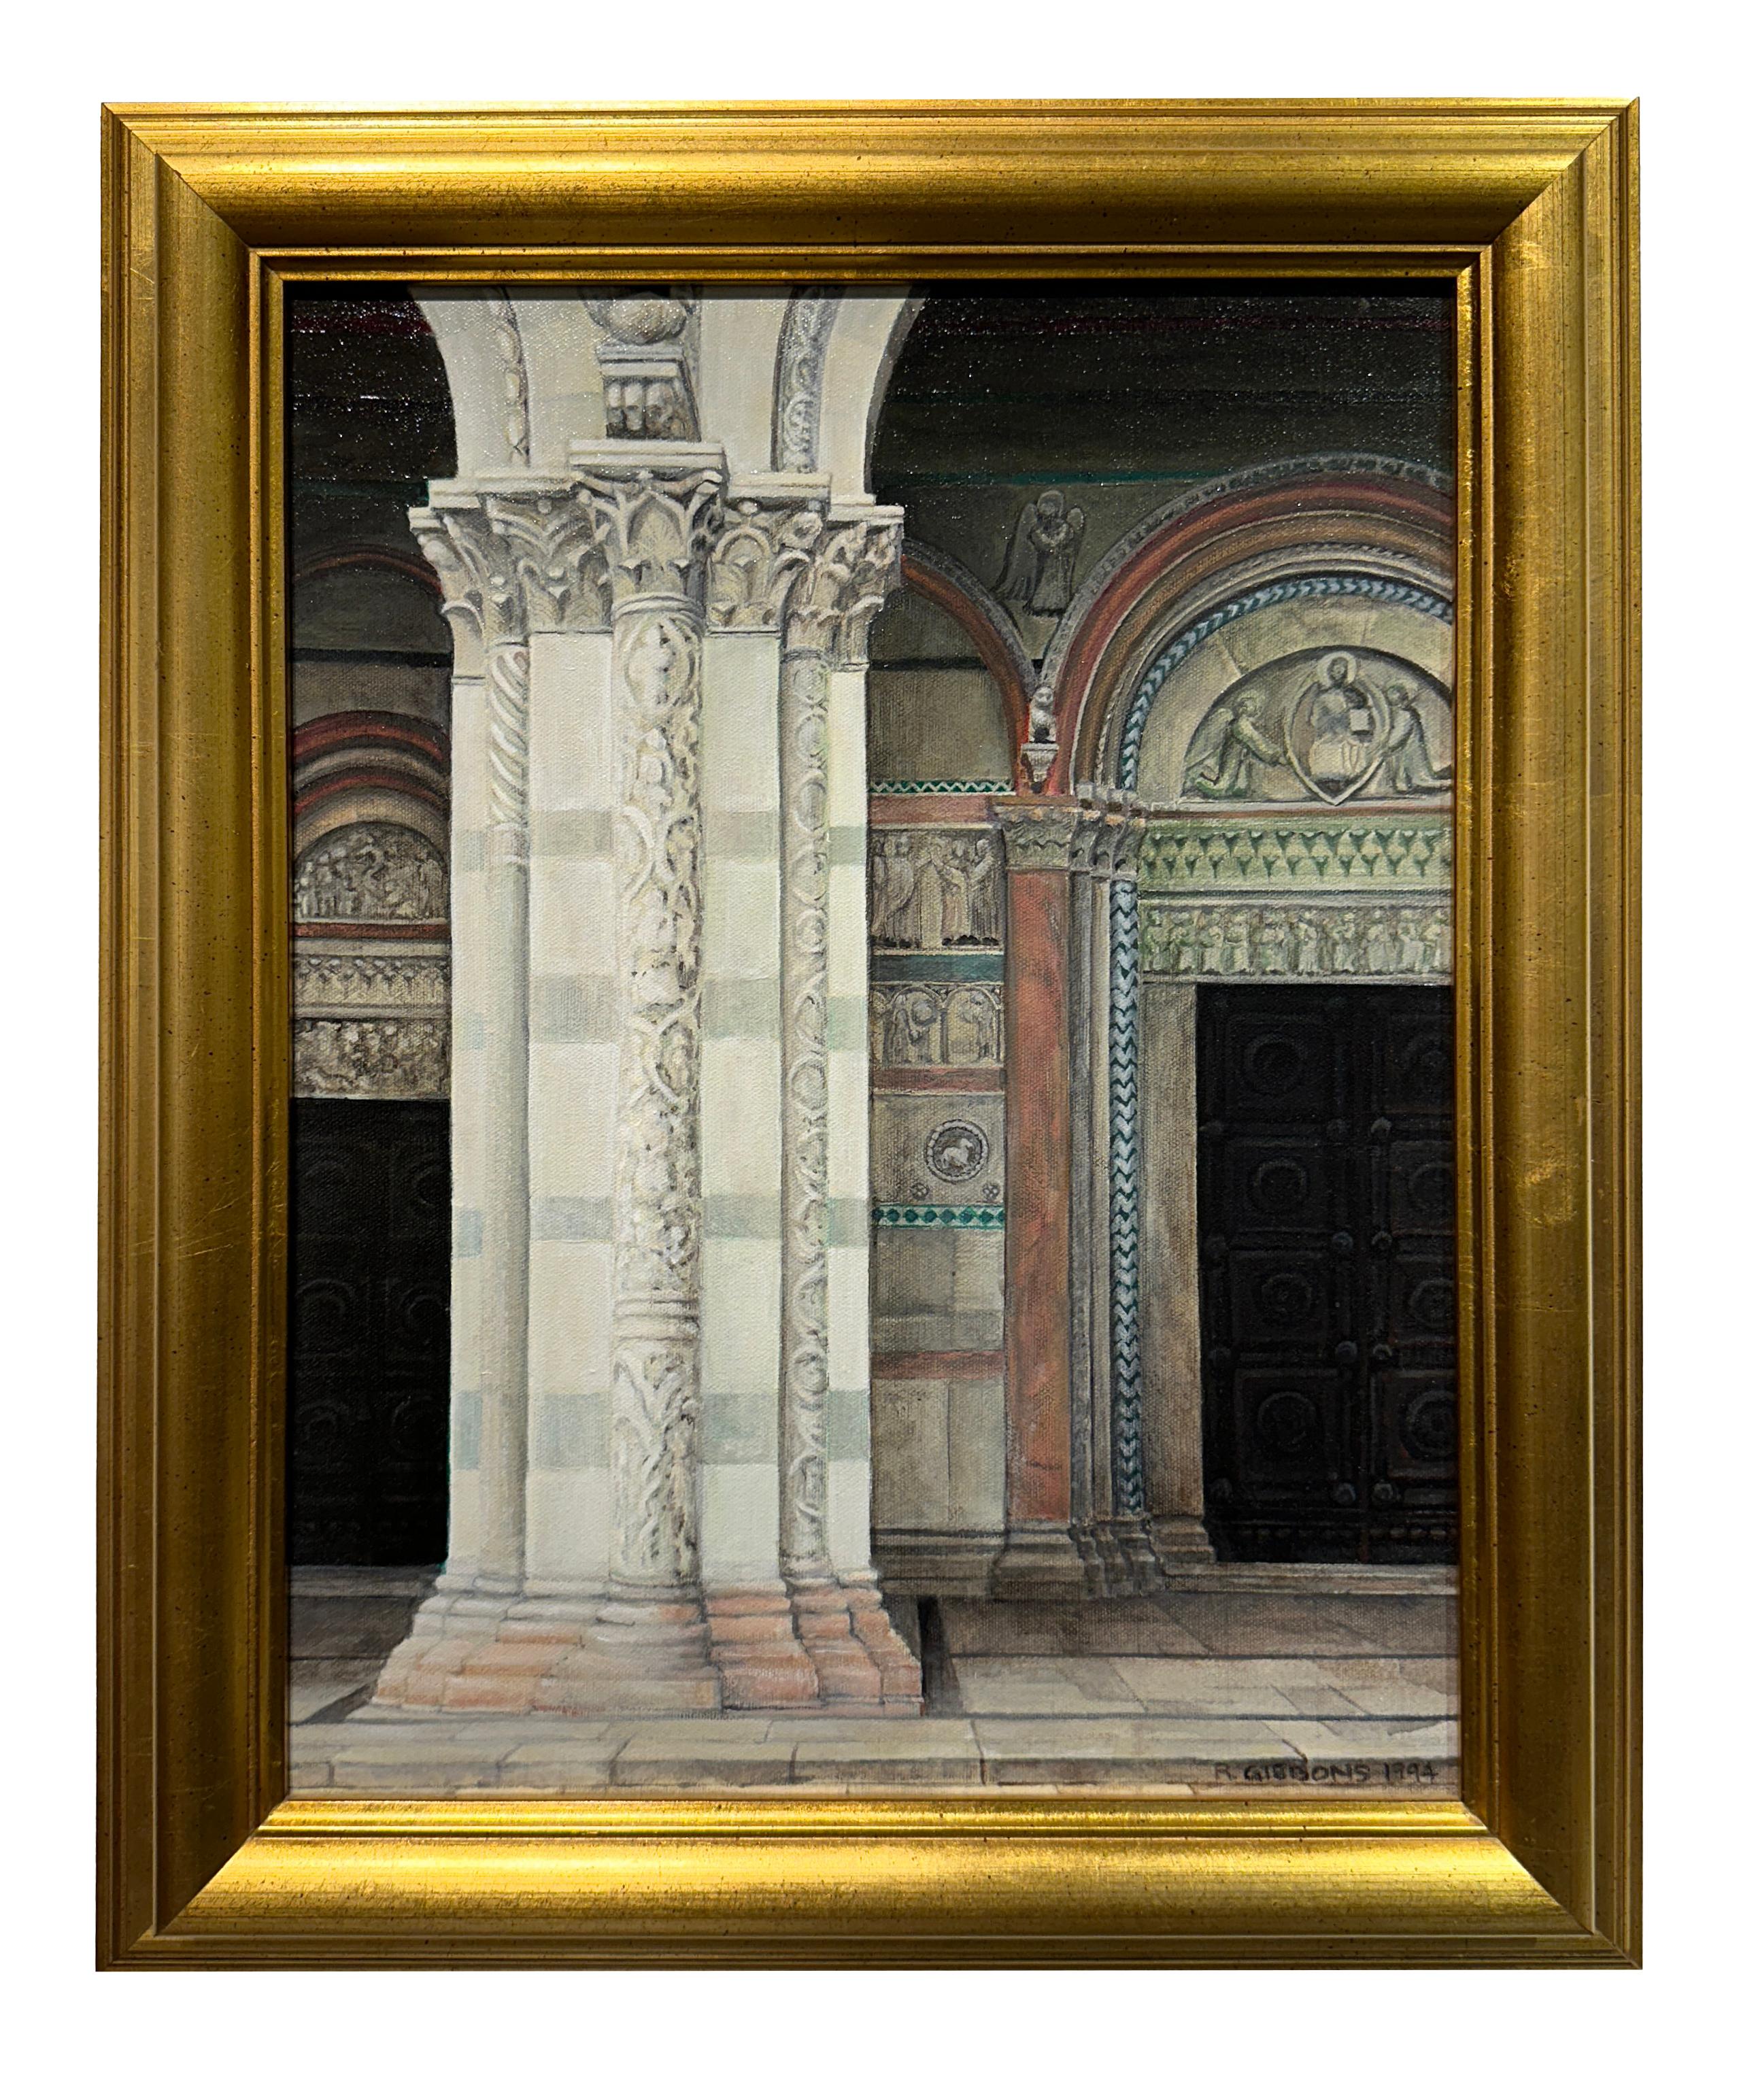 Duomo, Lucca Italy - Architectural Interior, Framed, Original Oil on Canvas